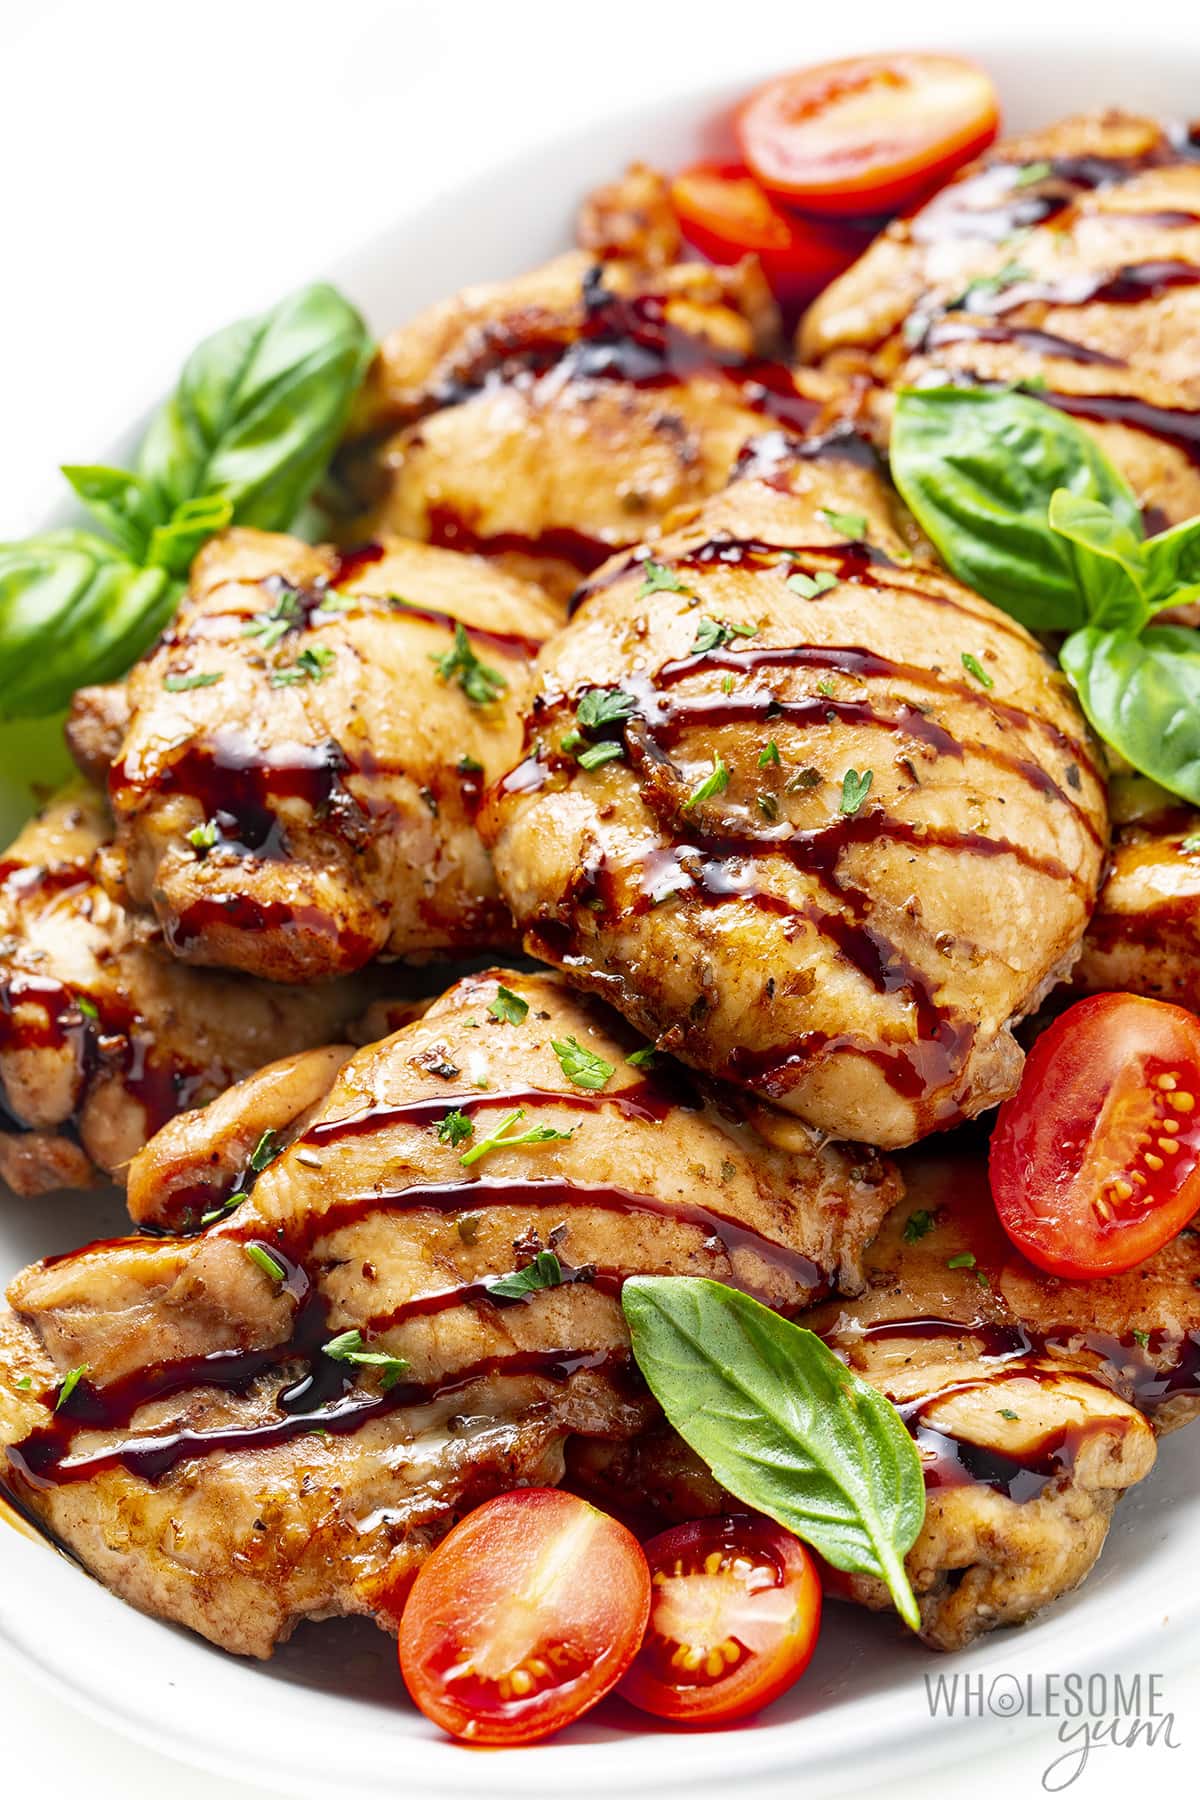 Balsamic glazed chicken on a serving plater with basil leaves and tomatoes.